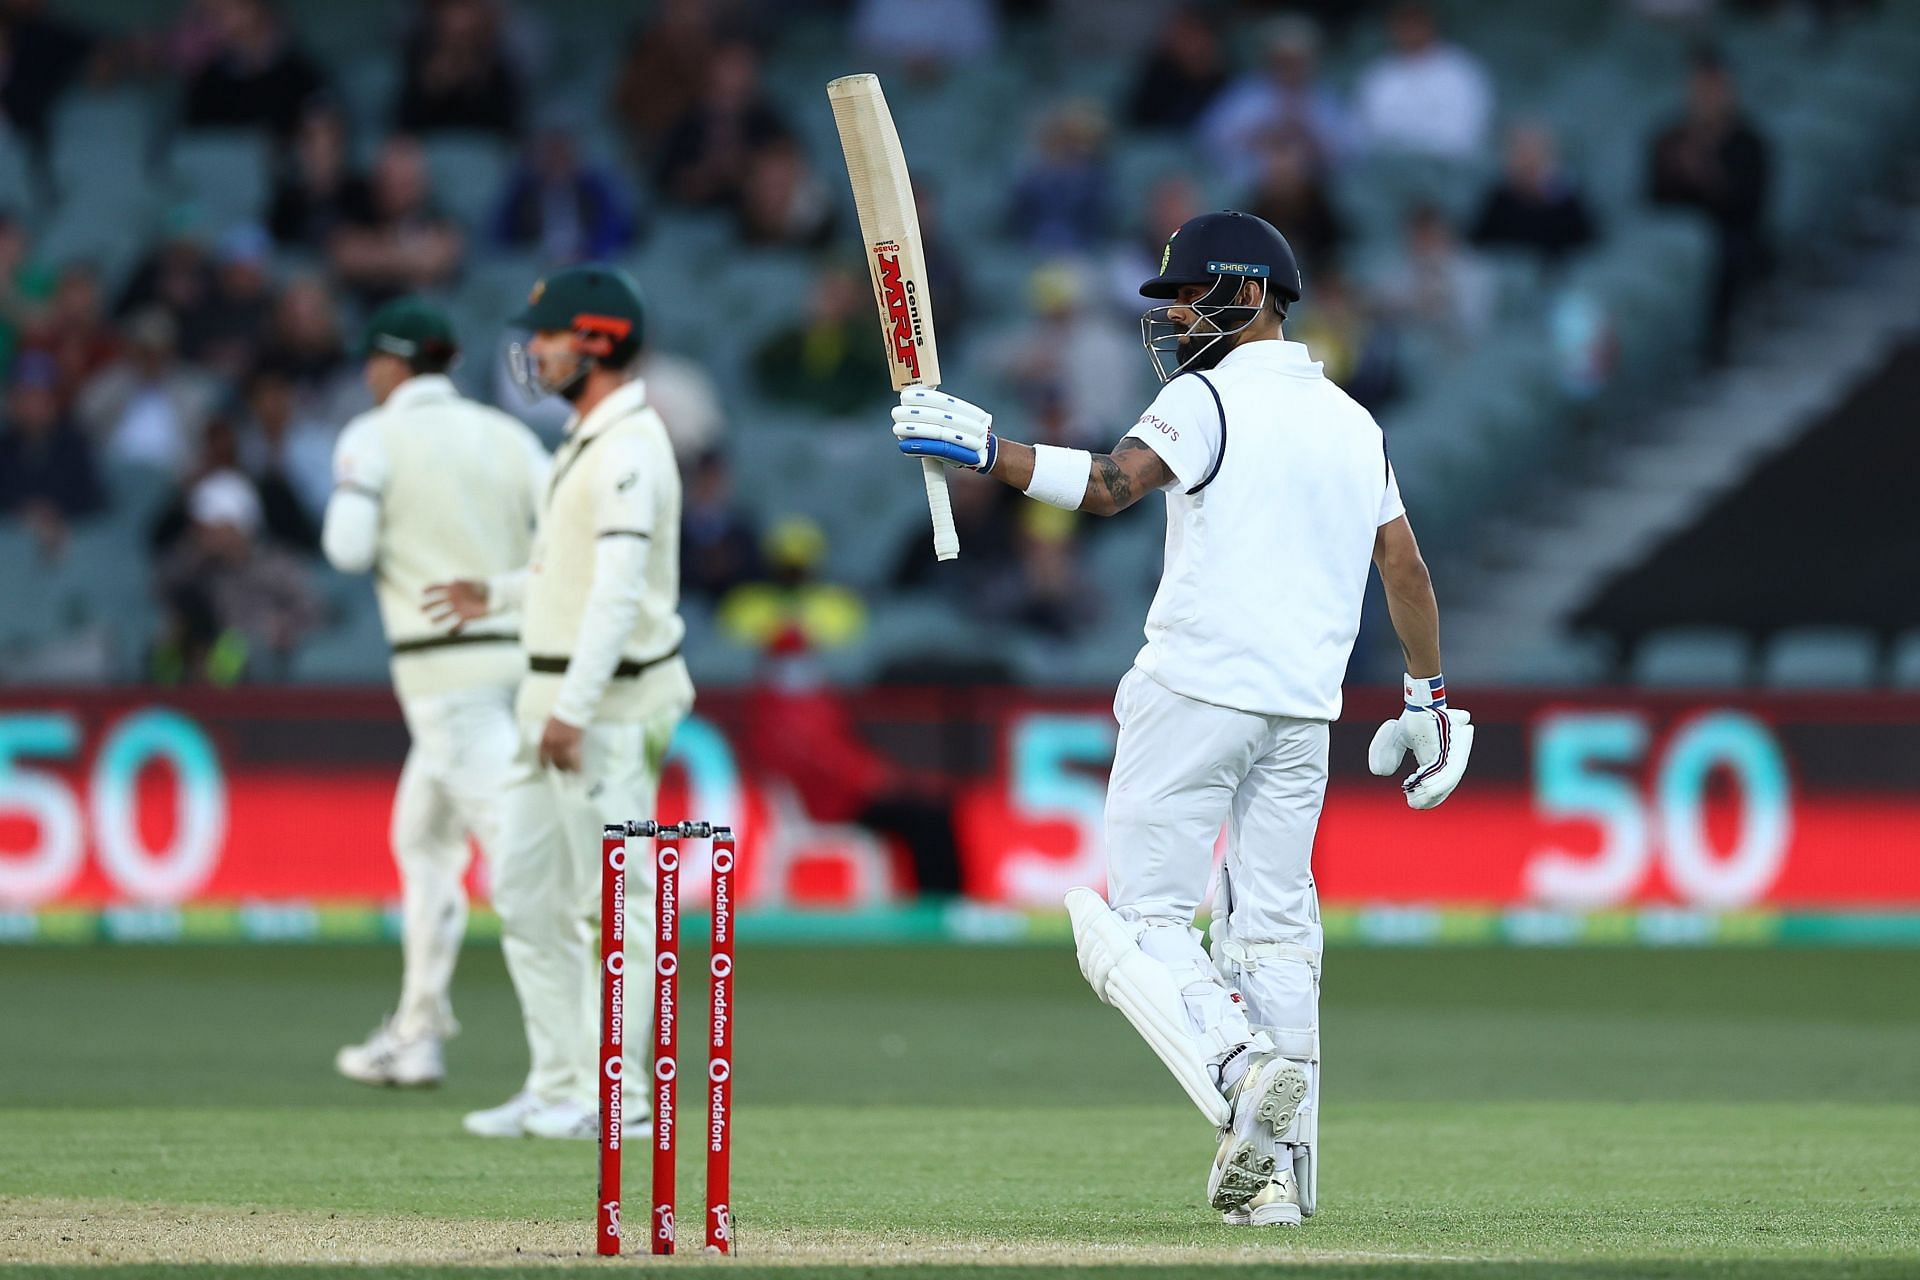 Virat Kohli celebrates his fifty during the Adelaide Test. Pic: Getty Images